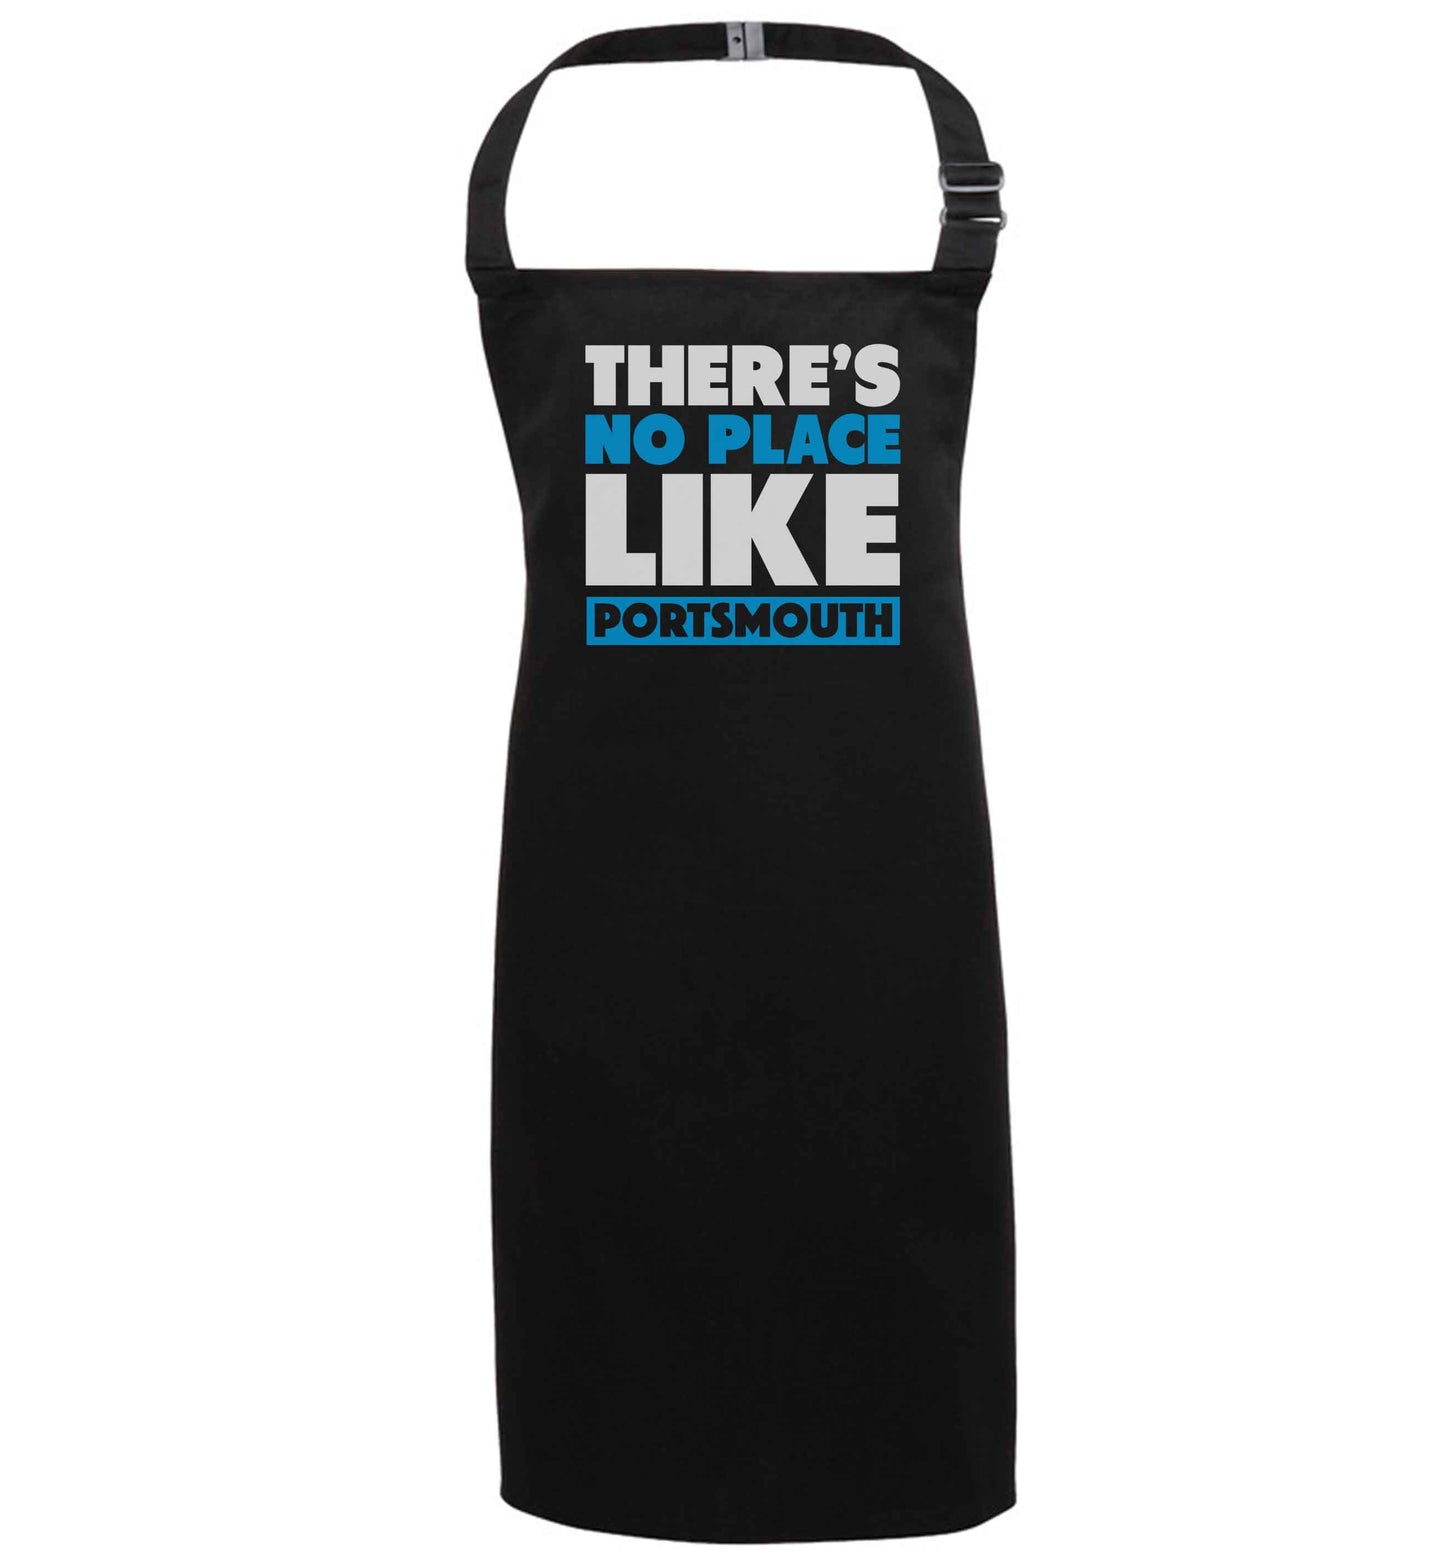 There's no place like Porstmouth black apron 7-10 years